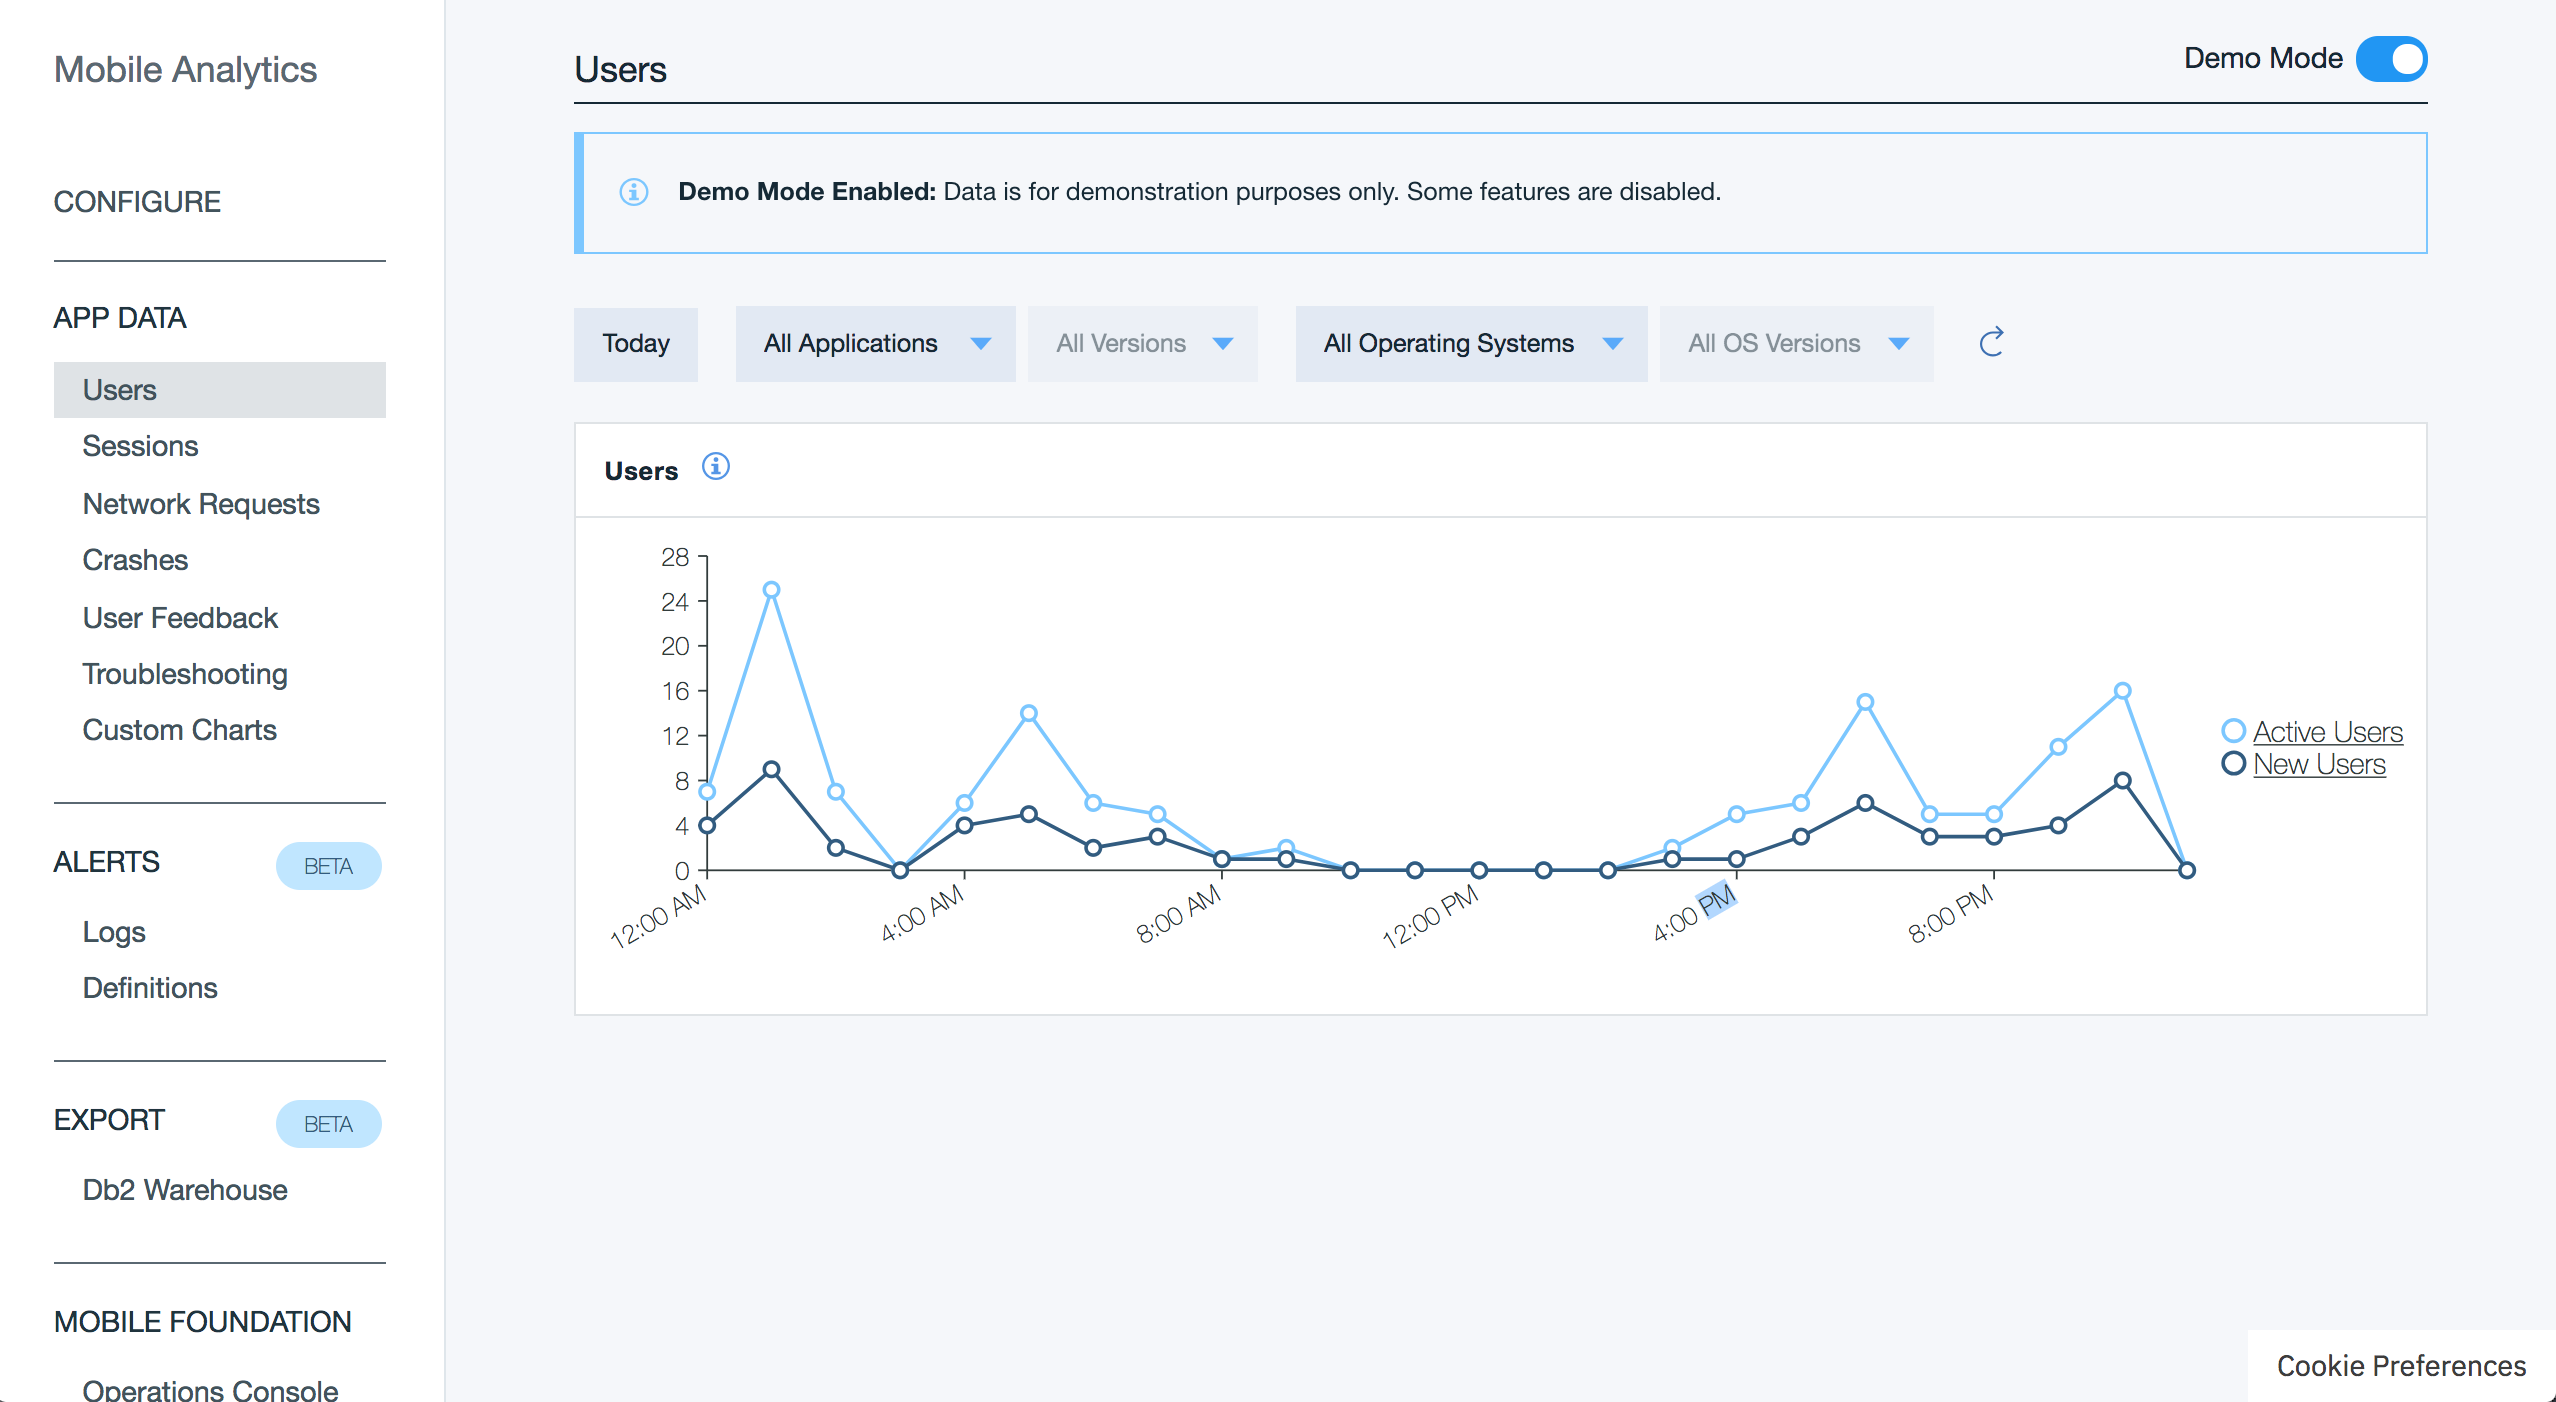 Image of Mobile Analytics console